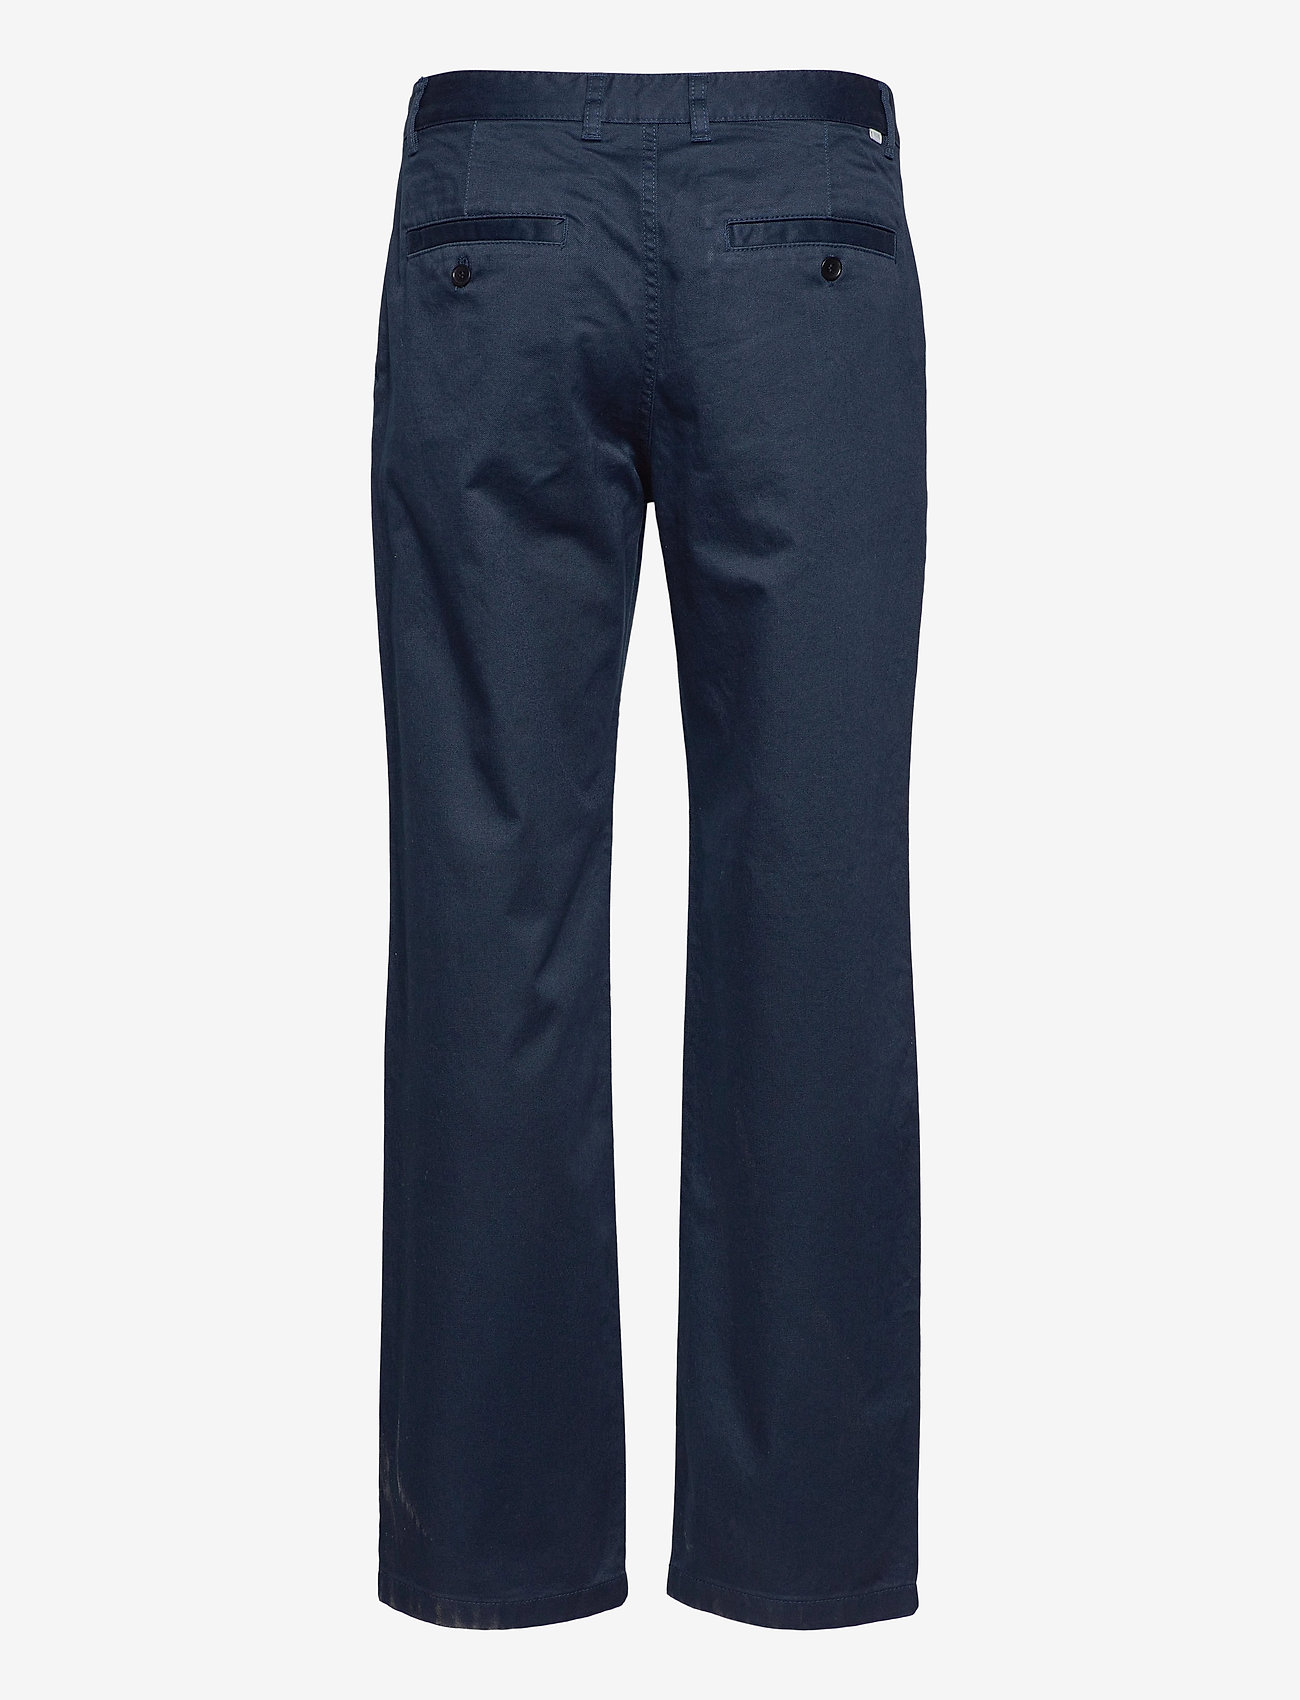 Wood Wood - Stefan classic trousers - chino's - navy - 1